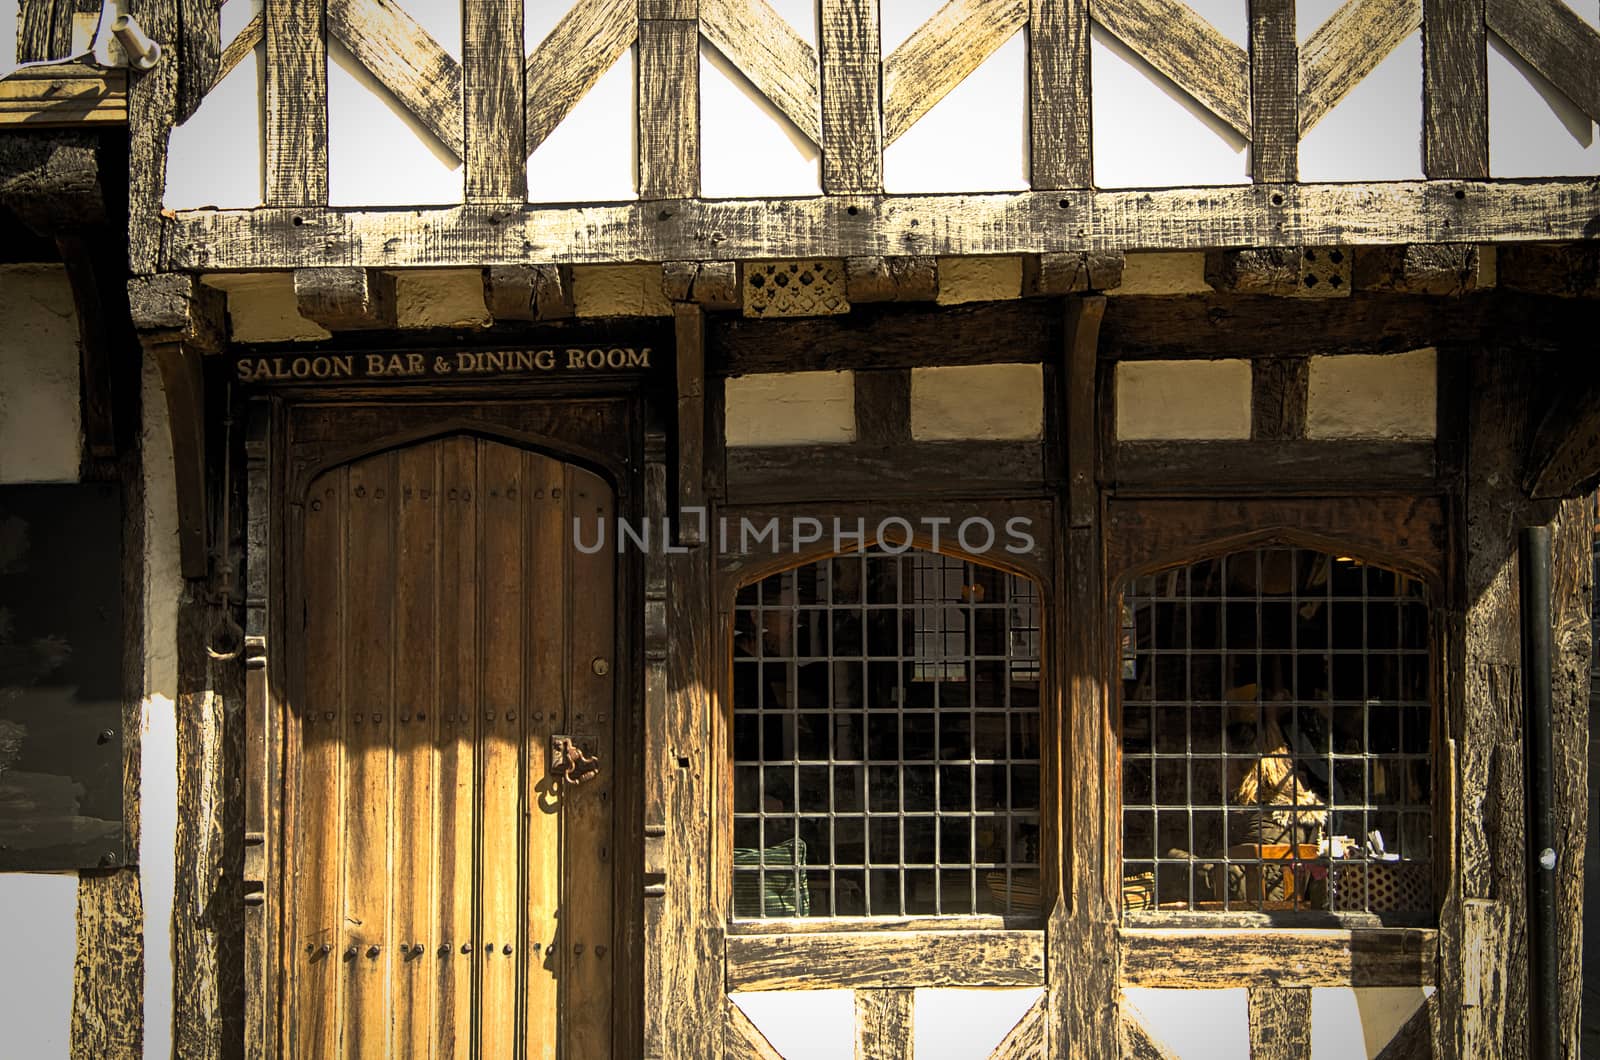 Half-timbered pub exterior in the south of England